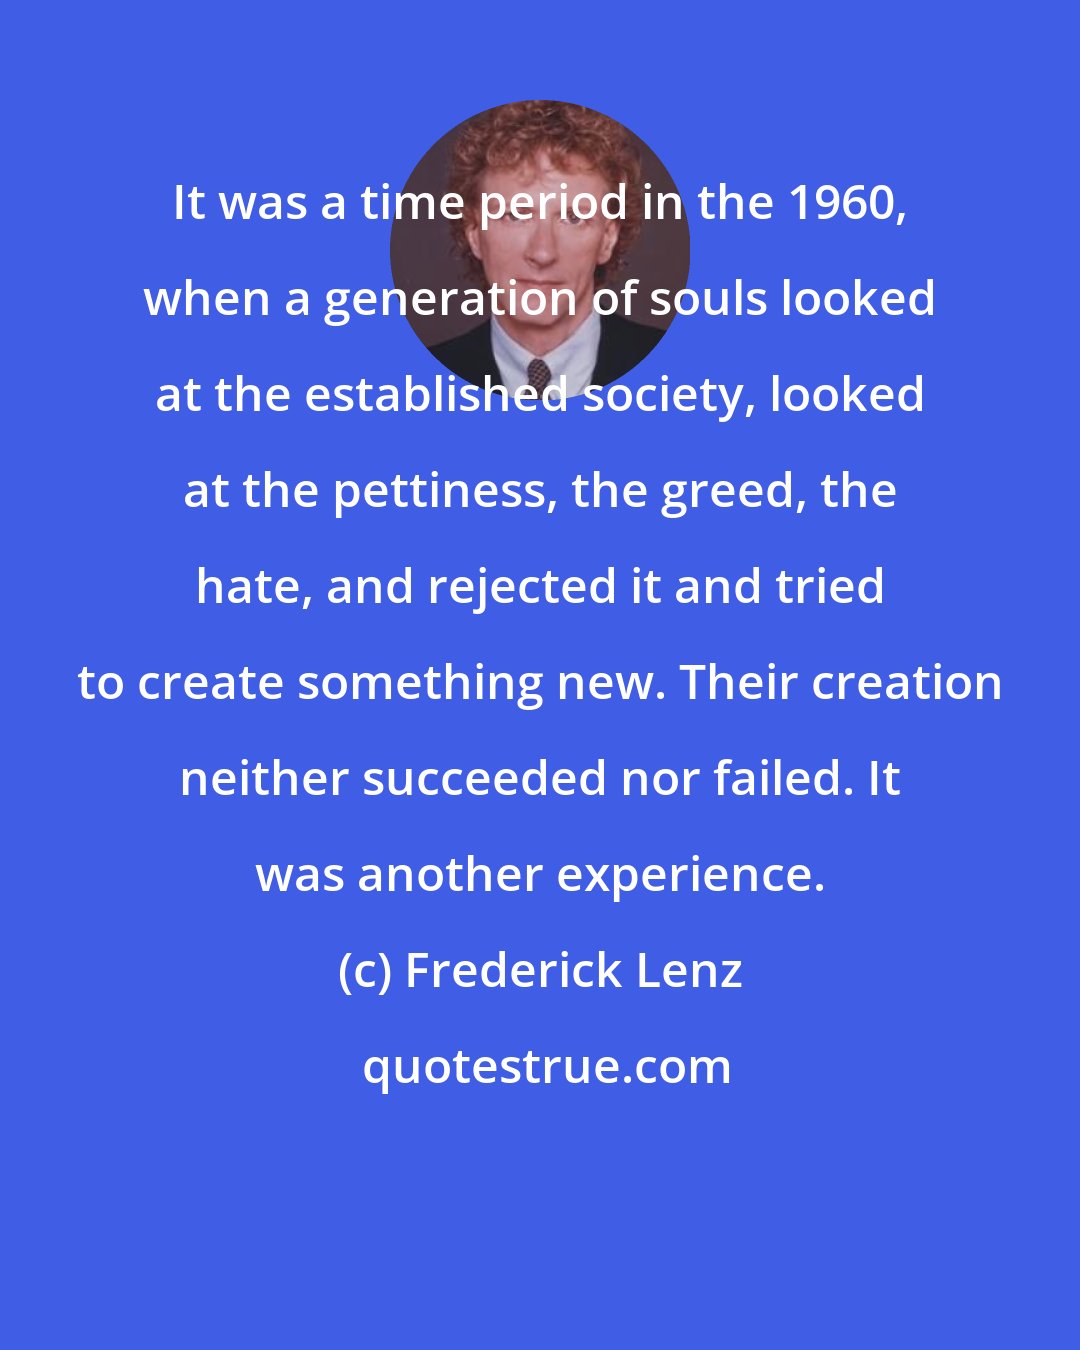 Frederick Lenz: It was a time period in the 1960, when a generation of souls looked at the established society, looked at the pettiness, the greed, the hate, and rejected it and tried to create something new. Their creation neither succeeded nor failed. It was another experience.